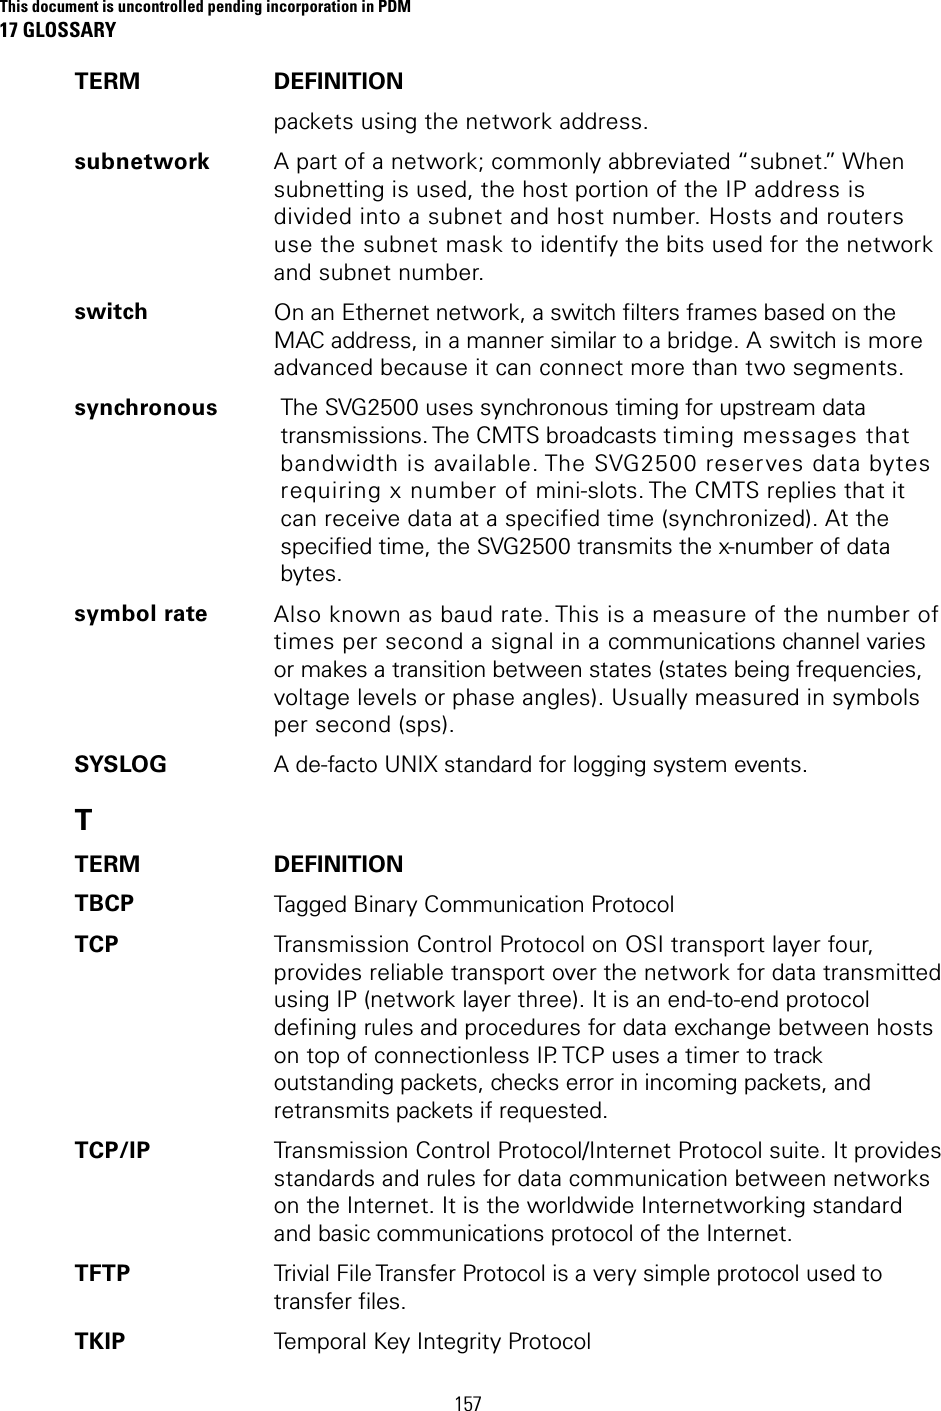 This document is uncontrolled pending incorporation in PDM 17 GLOSSARY  157 TERM DEFINITION packets using the network address. subnetwork A part of a network; commonly abbreviated “subnet.” When subnetting is used, the host portion of the IP address is divided into a subnet and host number. Hosts and routers use the subnet mask to identify the bits used for the network and subnet number. switch On an Ethernet network, a switch filters frames based on the MAC address, in a manner similar to a bridge. A switch is more advanced because it can connect more than two segments. synchronous The SVG2500 uses synchronous timing for upstream data transmissions. The CMTS broadcasts timing messages that bandwidth is available. The SVG2500 reserves data bytes requiring x number of mini-slots. The CMTS replies that it can receive data at a specified time (synchronized). At the specified time, the SVG2500 transmits the x-number of data bytes. symbol rate Also known as baud rate. This is a measure of the number of times per second a signal in a communications channel varies or makes a transition between states (states being frequencies, voltage levels or phase angles). Usually measured in symbols per second (sps). SYSLOG  A de-facto UNIX standard for logging system events. T TERM DEFINITION TBCP  Tagged Binary Communication Protocol TCP  Transmission Control Protocol on OSI transport layer four, provides reliable transport over the network for data transmitted using IP (network layer three). It is an end-to-end protocol defining rules and procedures for data exchange between hosts on top of connectionless IP. TCP uses a timer to track outstanding packets, checks error in incoming packets, and retransmits packets if requested. TCP/IP  Transmission Control Protocol/Internet Protocol suite. It provides standards and rules for data communication between networks on the Internet. It is the worldwide Internetworking standard and basic communications protocol of the Internet. TFTP  Trivial File Transfer Protocol is a very simple protocol used to transfer files. TKIP  Temporal Key Integrity Protocol 